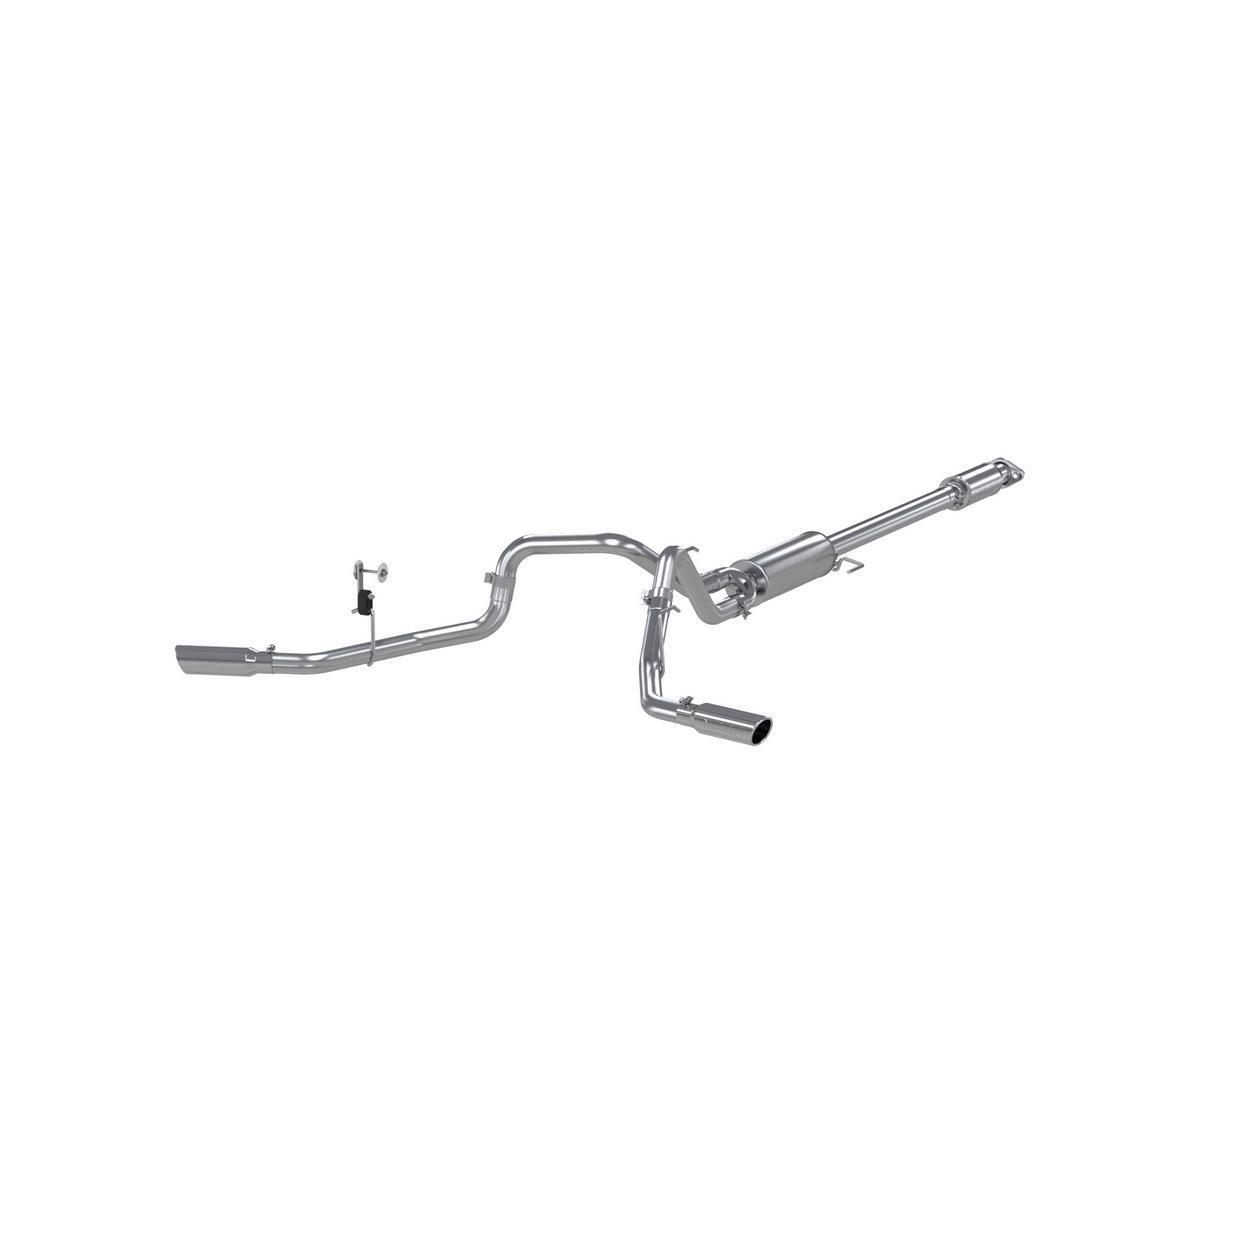 MBRP Exhaust S5257AL-FZ Exhaust System Kit for 2016-2019 Ford F-150